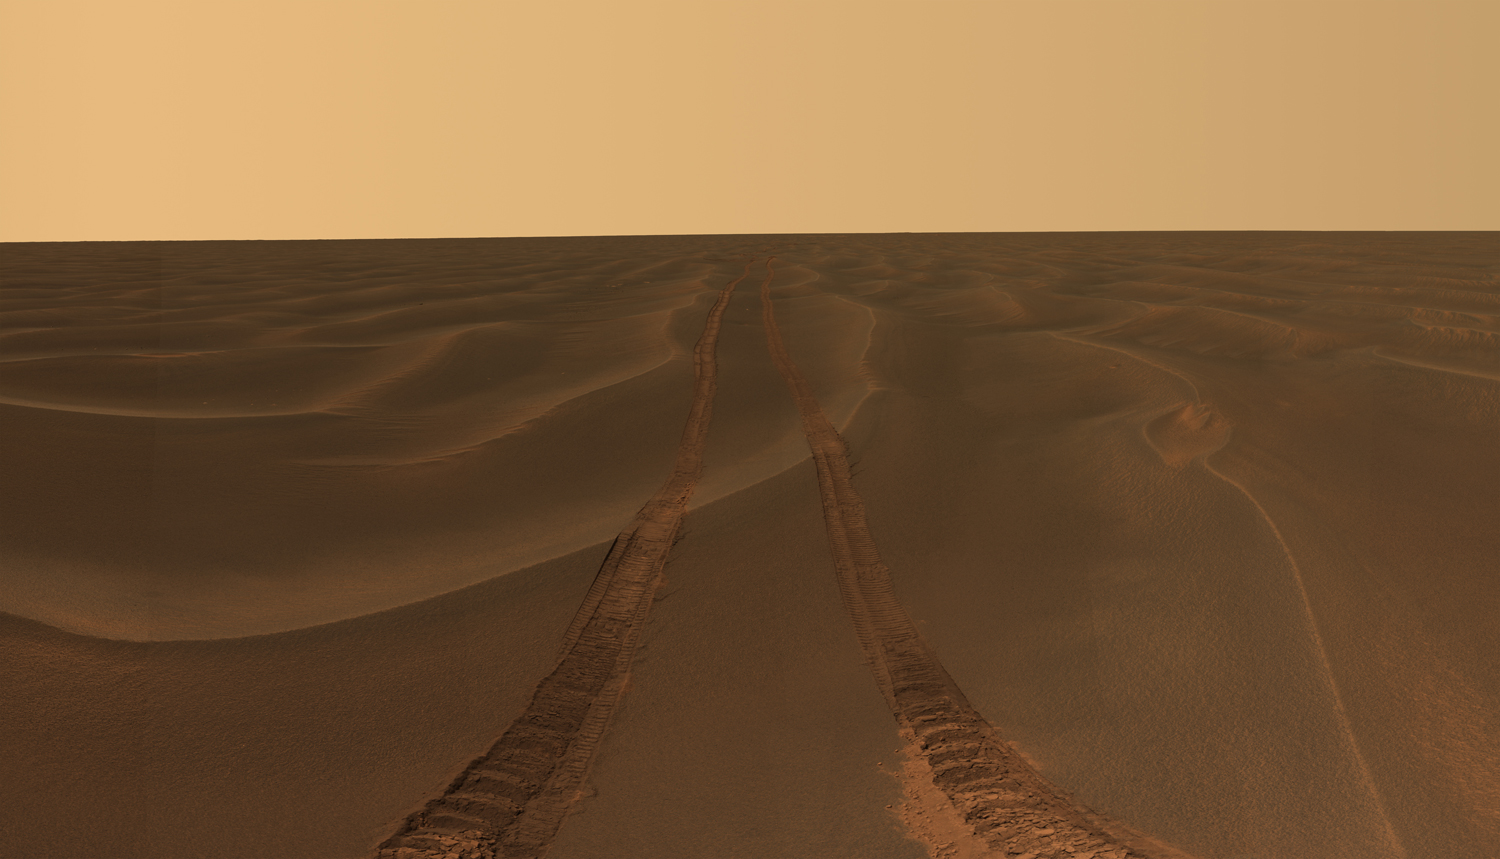 Rover tracks disappear toward the horizon like the wake of a ship across the desolate sea of sand between the craters Endurance and Victoria on the Meridiani Plains.